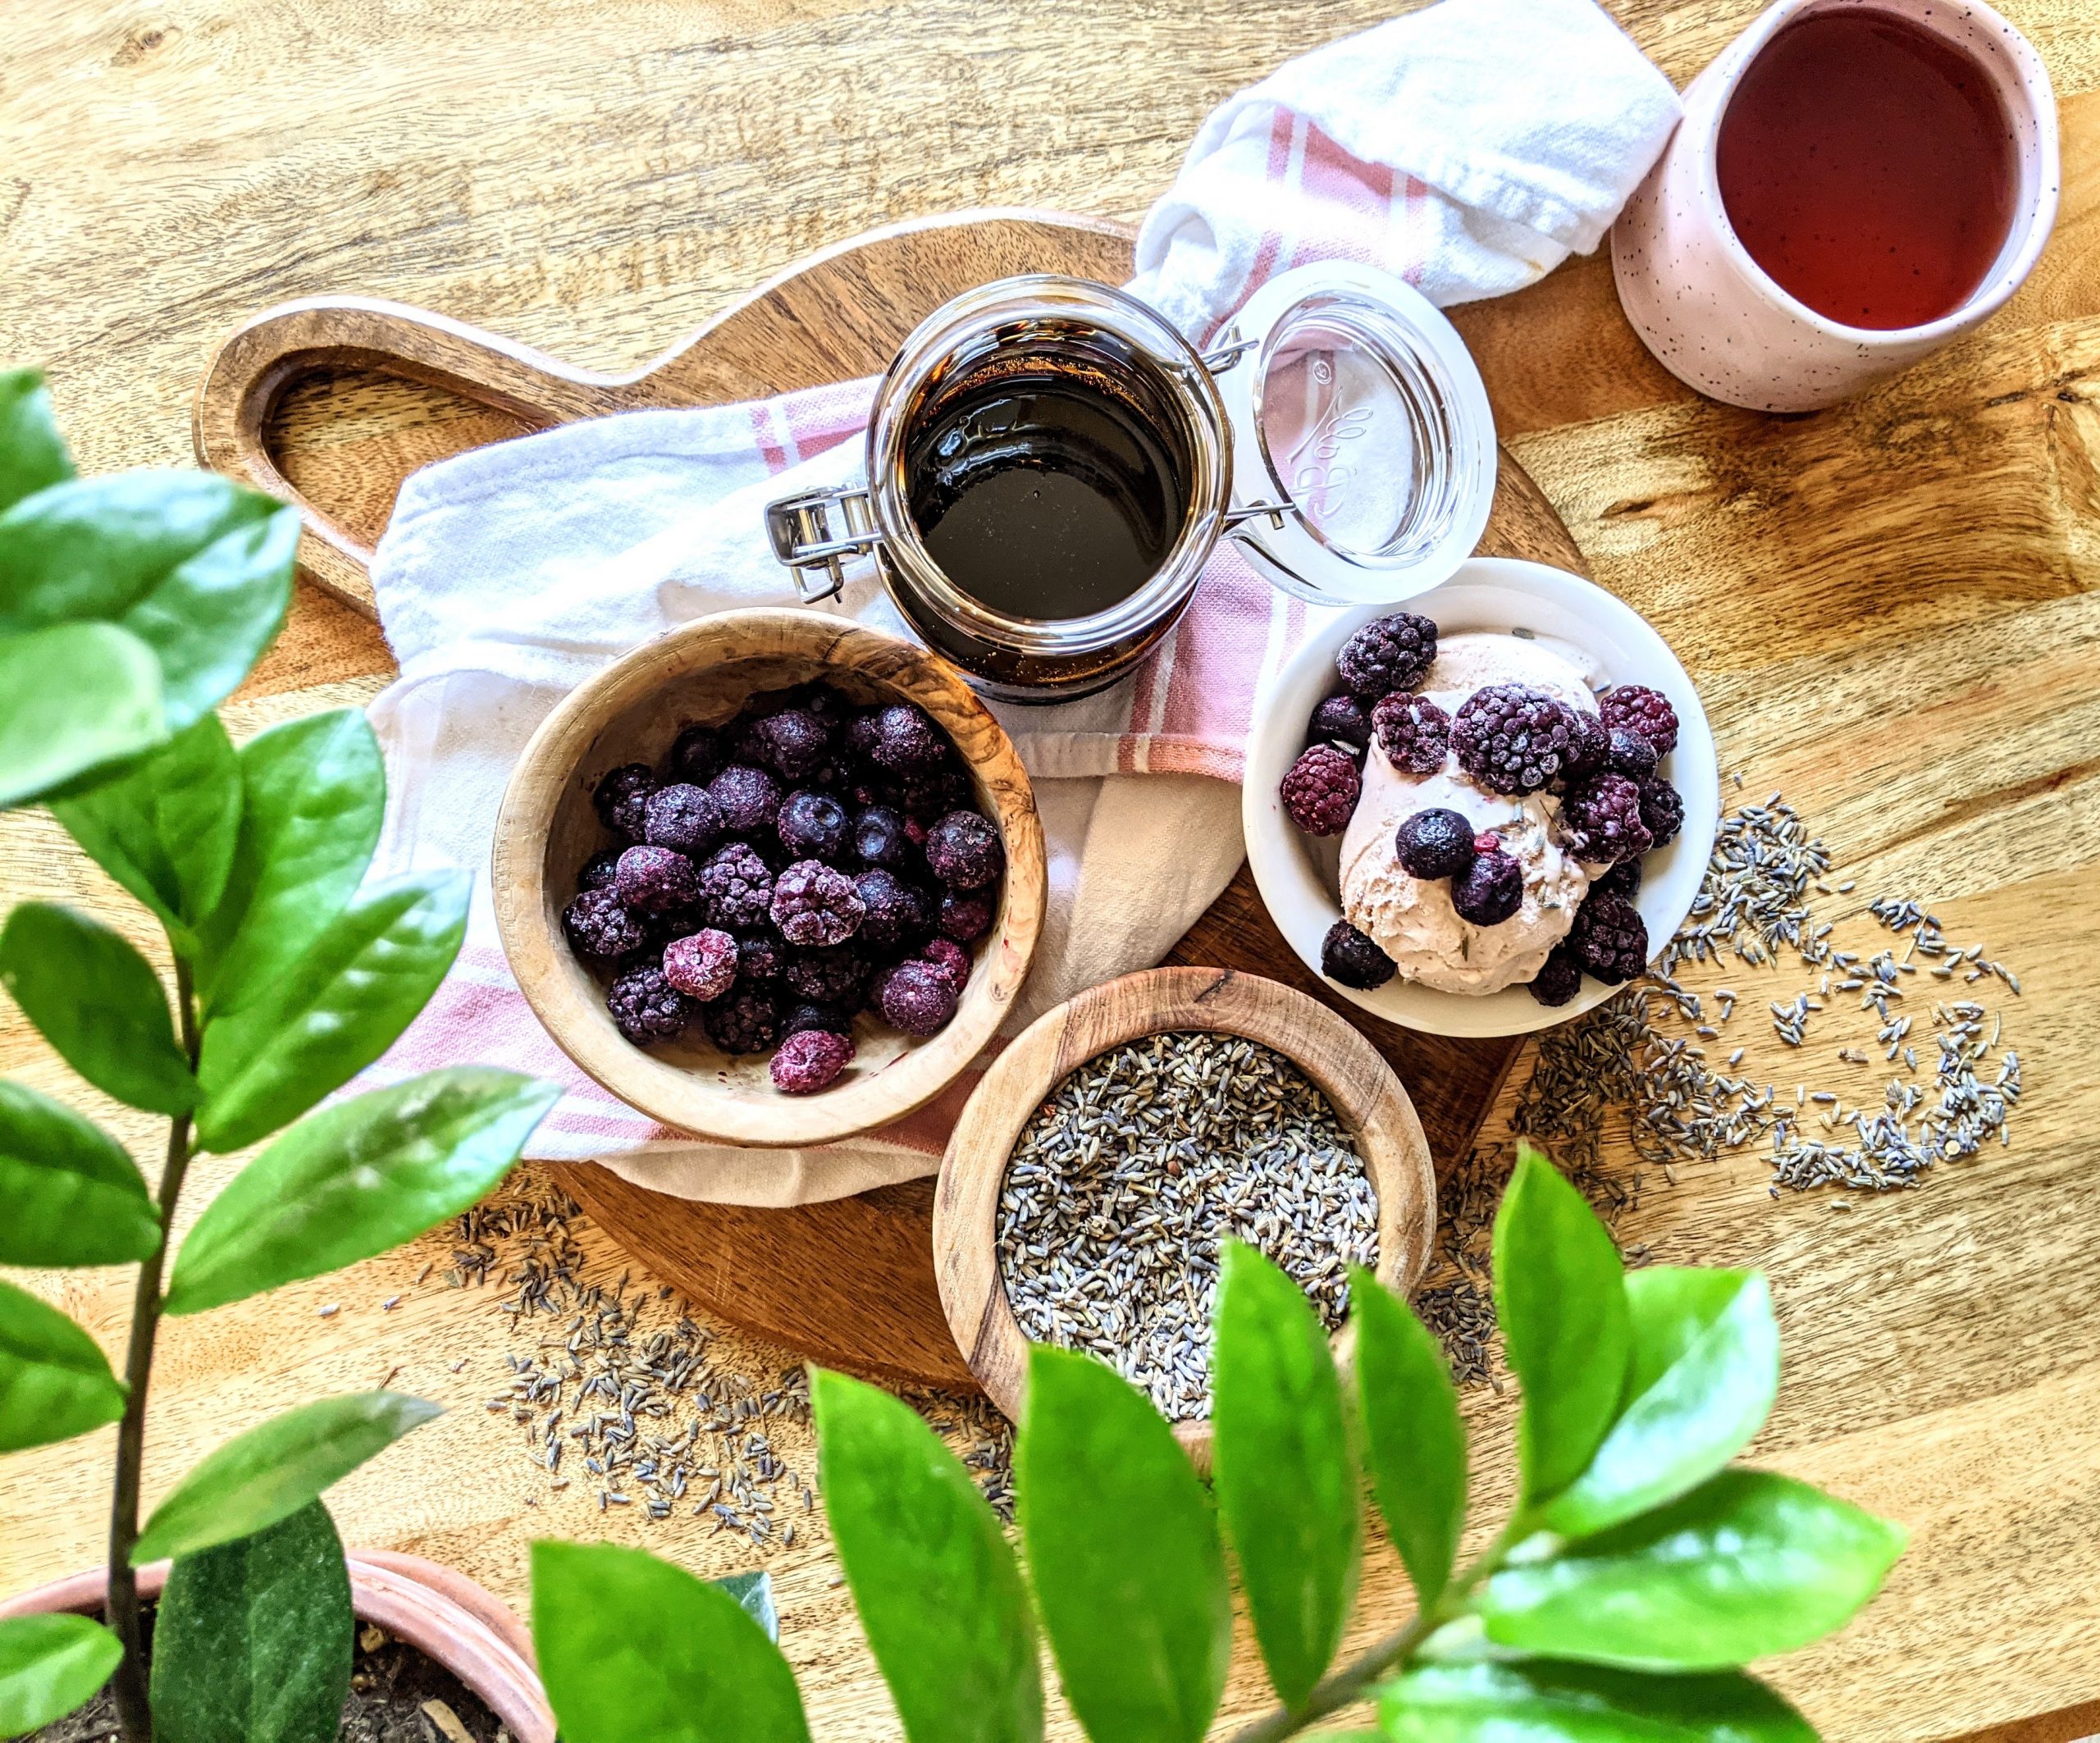 A sundae bar complete with thick balsamic glaze, frozen mixed berries, French lavender, and ice cream. A cup of tea sits on the side and a plant is seen in the frame.